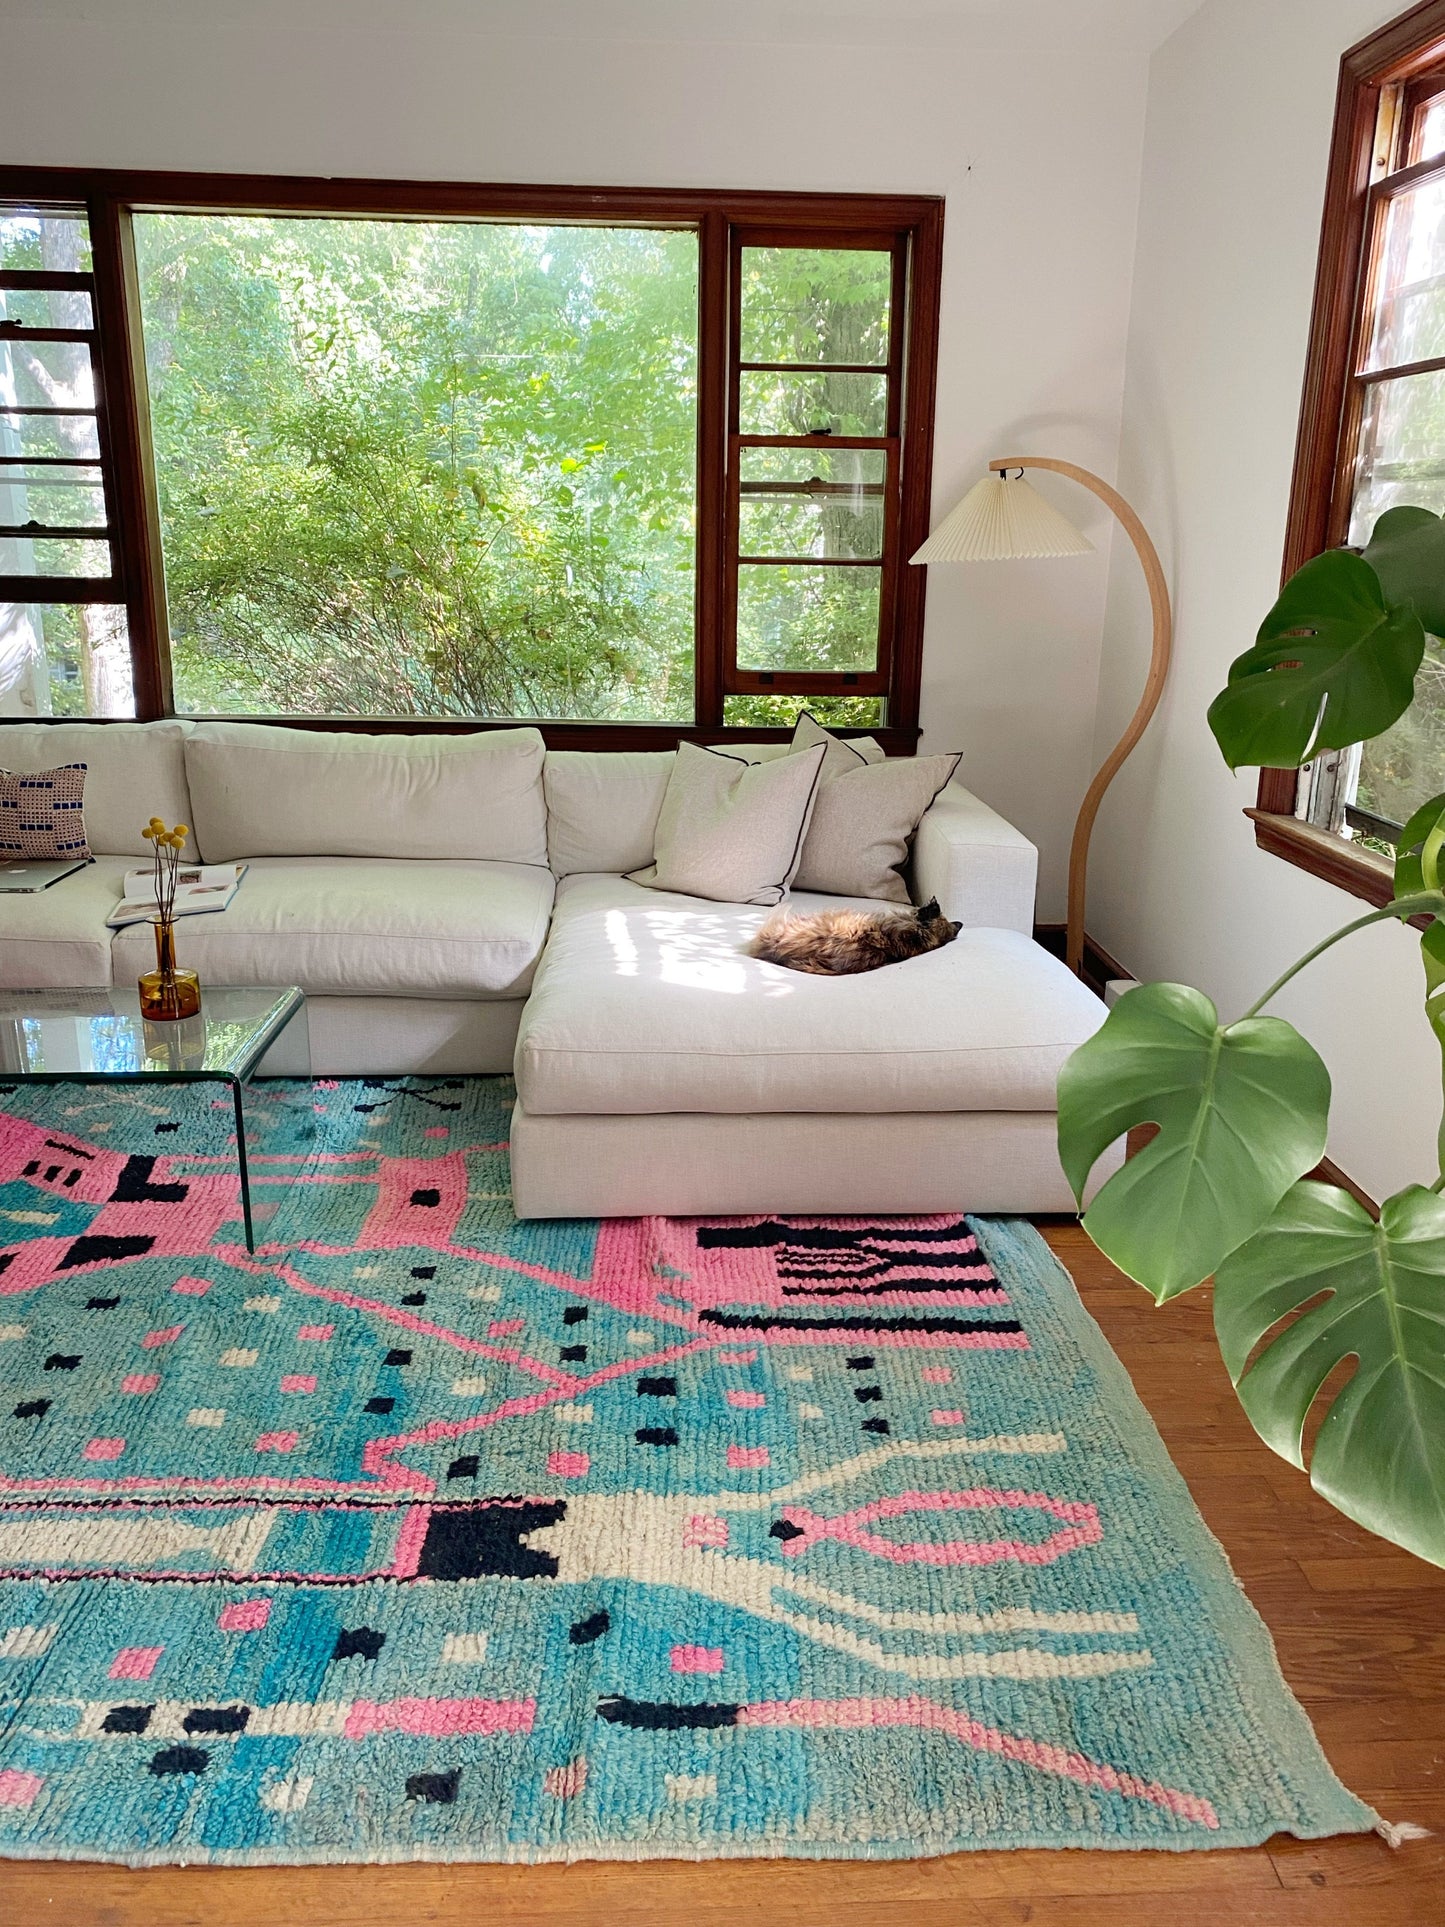 Soft blue and pink woven in a large Moroccan area rug